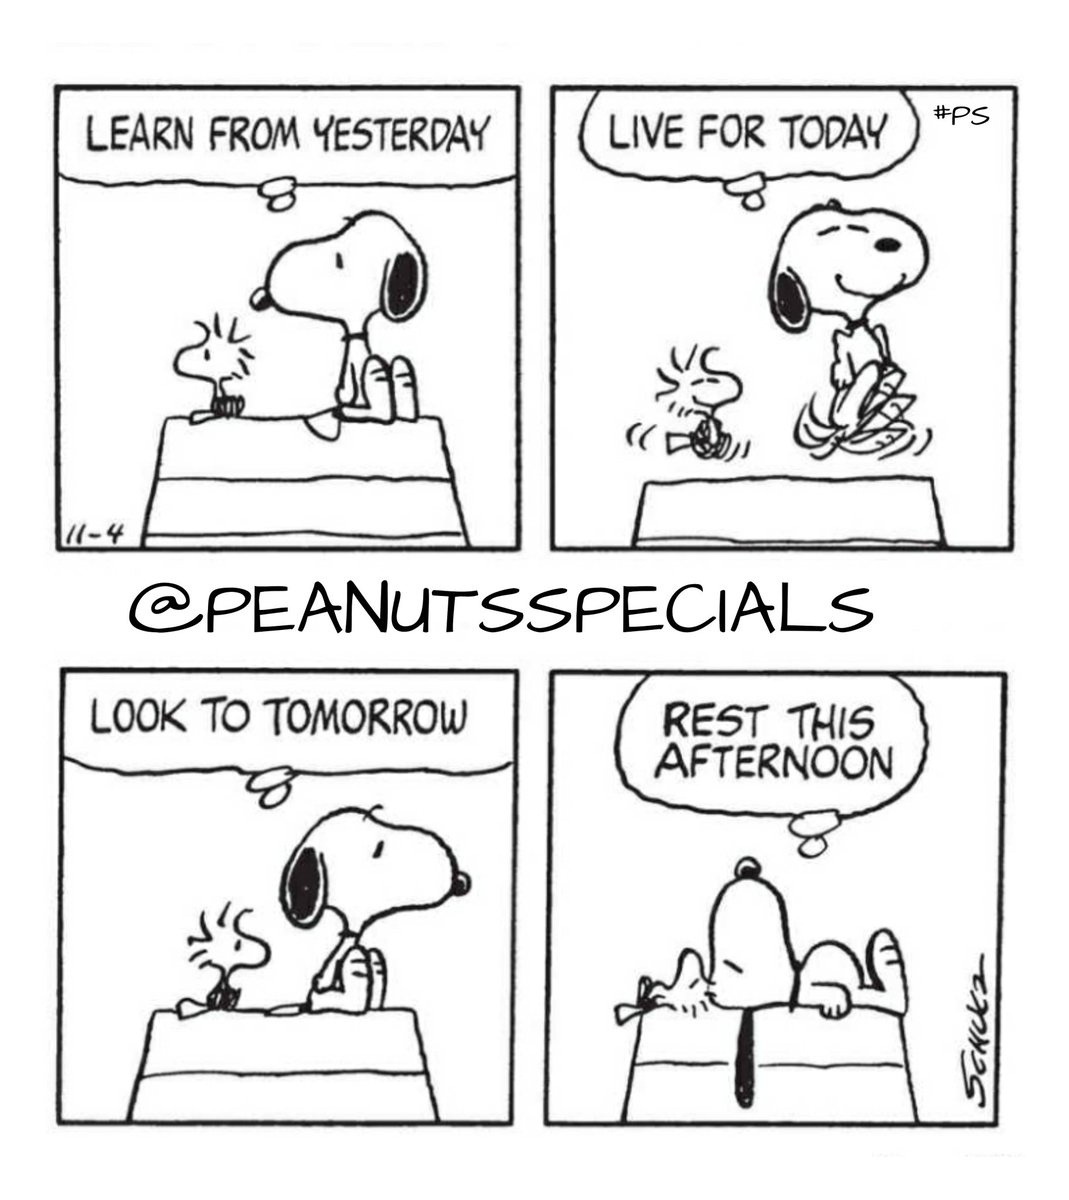 First Appearance: November 4, 1978
#snoopy #woodstock #learn #from #yesterday #livefortoday #look #tomorrow #rest #thisafternoon #peanutswednesday #peanutsstrong #peanutshome #staysafe #schulz #ps #pnts #peanuts #peanutscoloringbook #officialpeanutsspecials